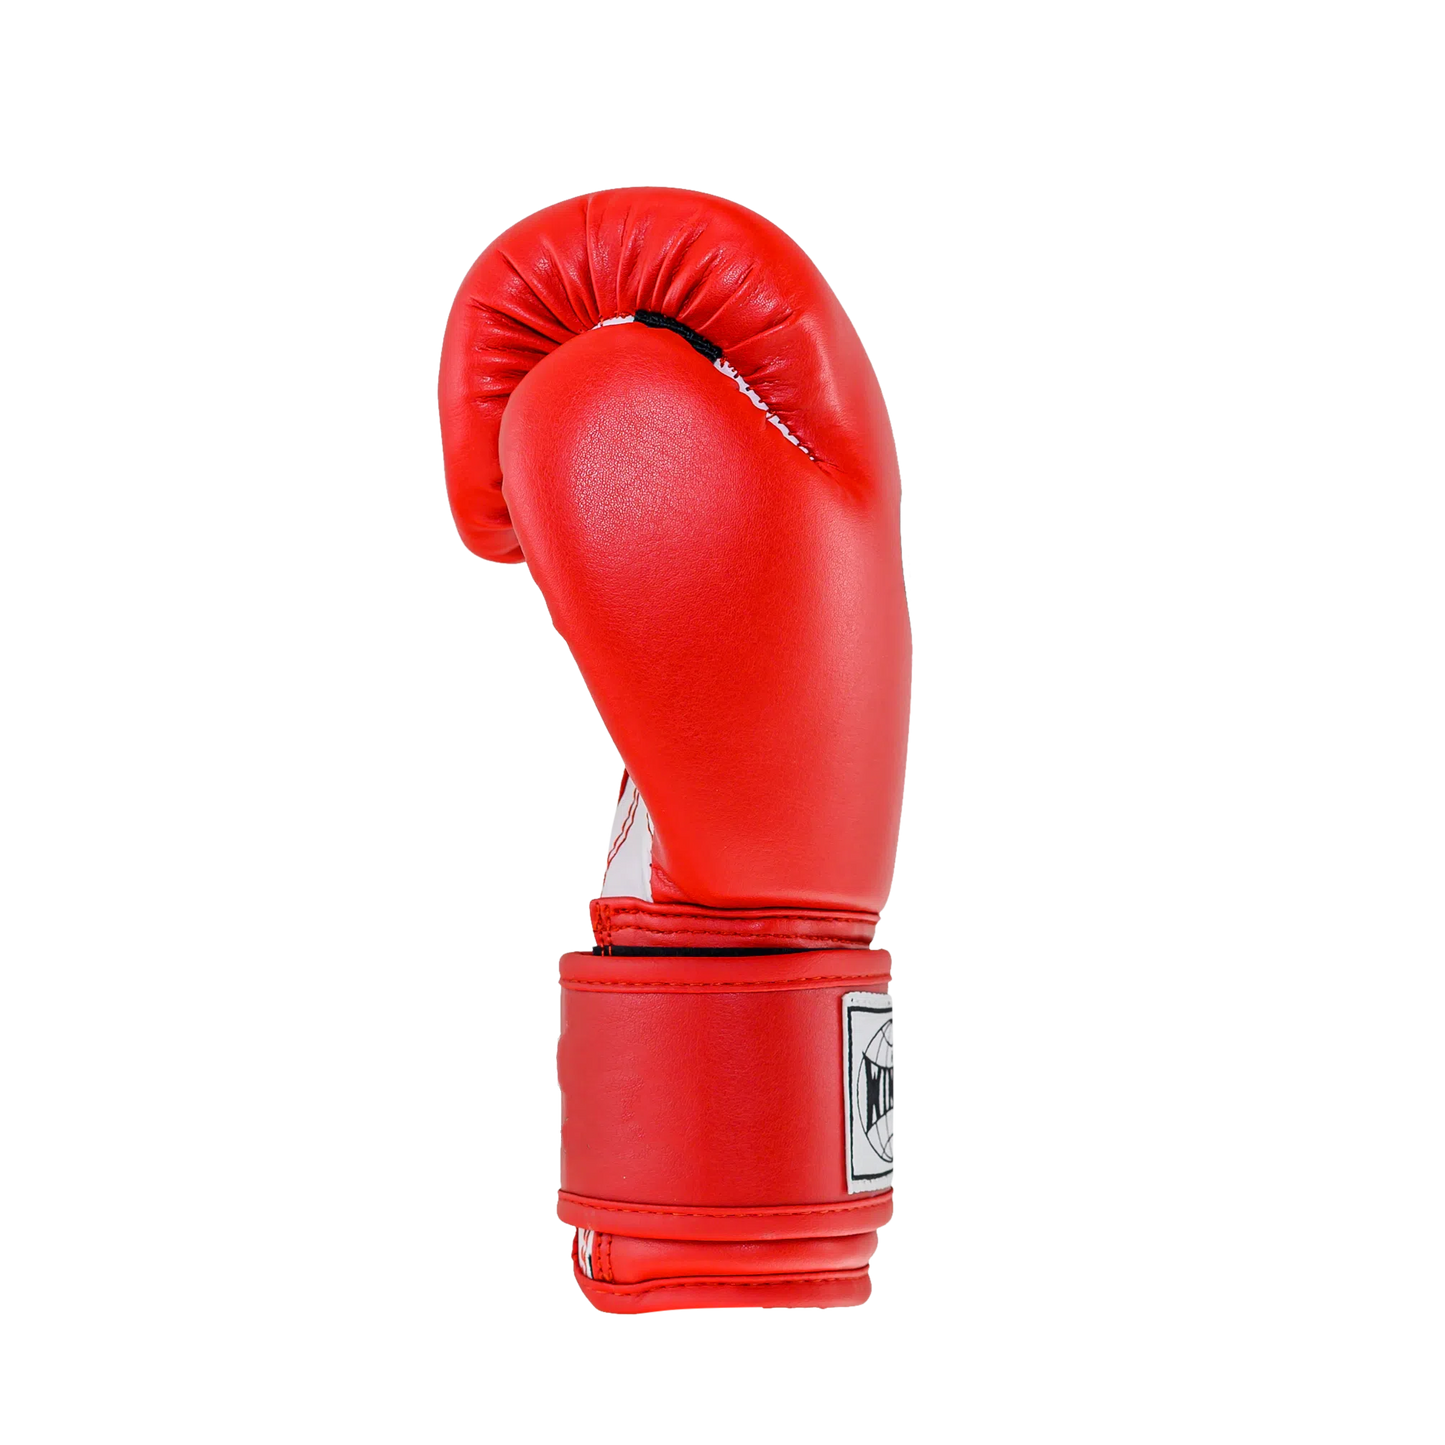 Kids Boxing Gloves - Red